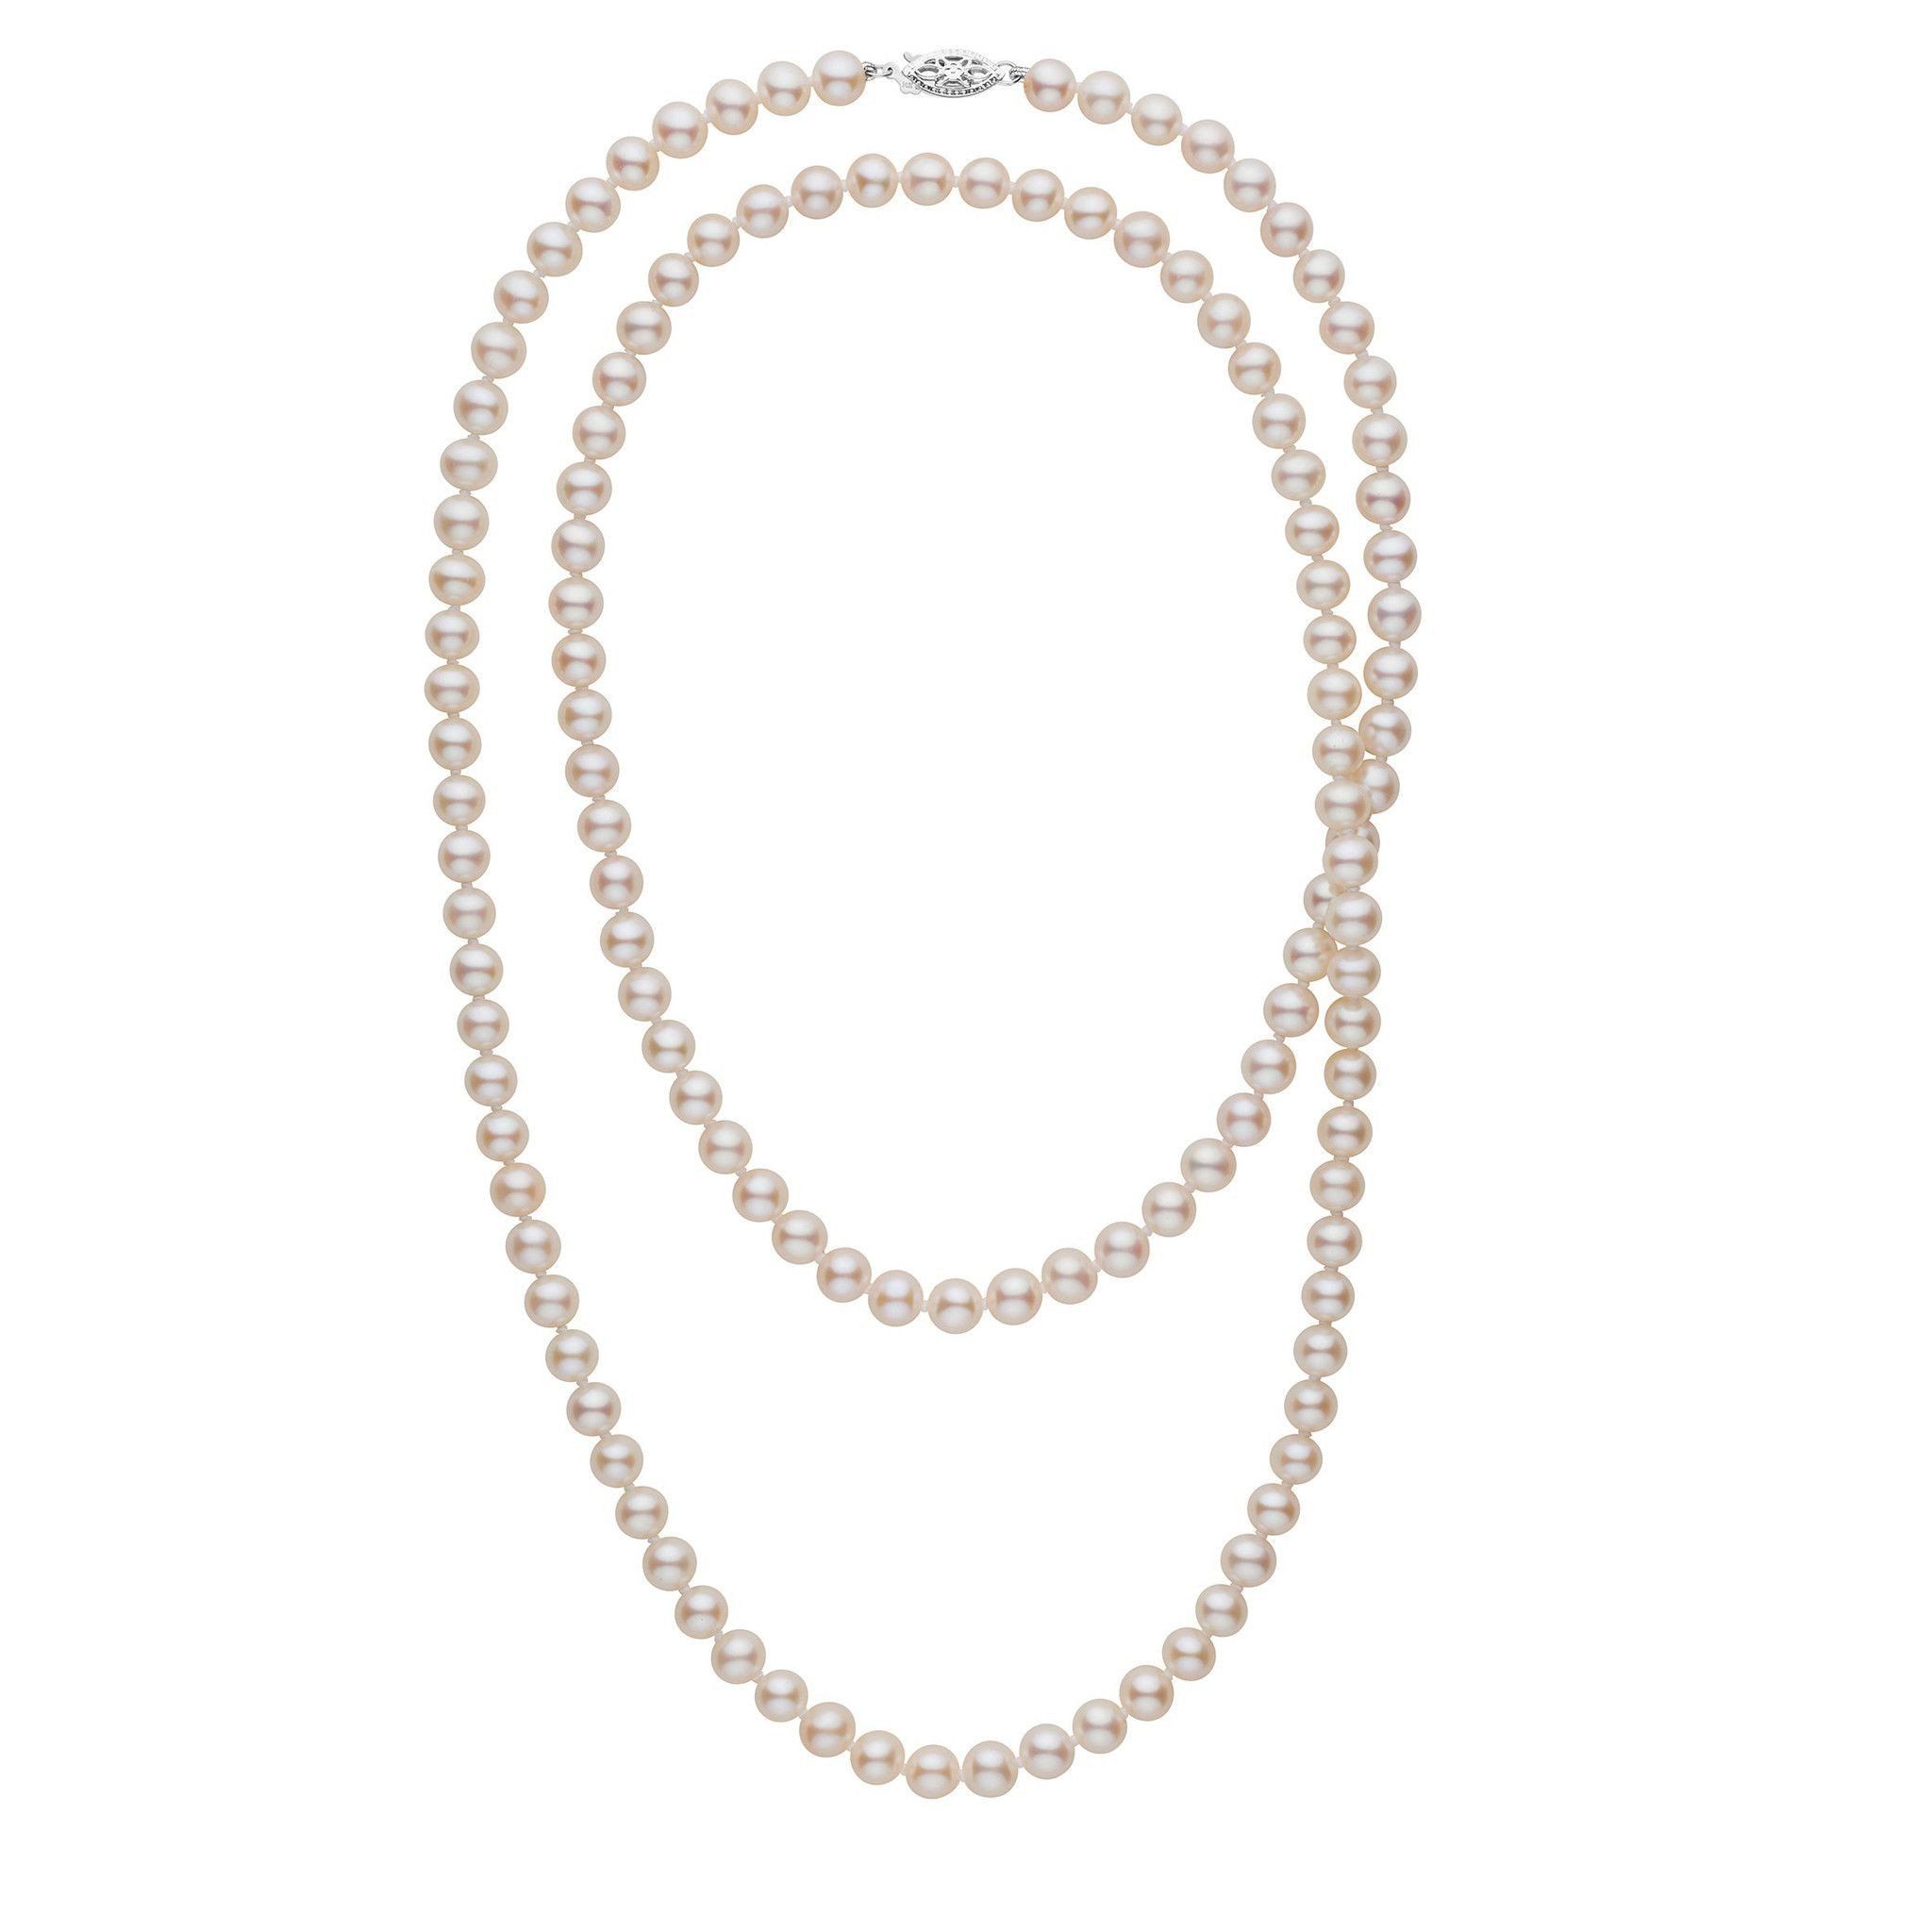 35-inch 6.5-7.0 mm AAA White Freshwater Pearl Necklace